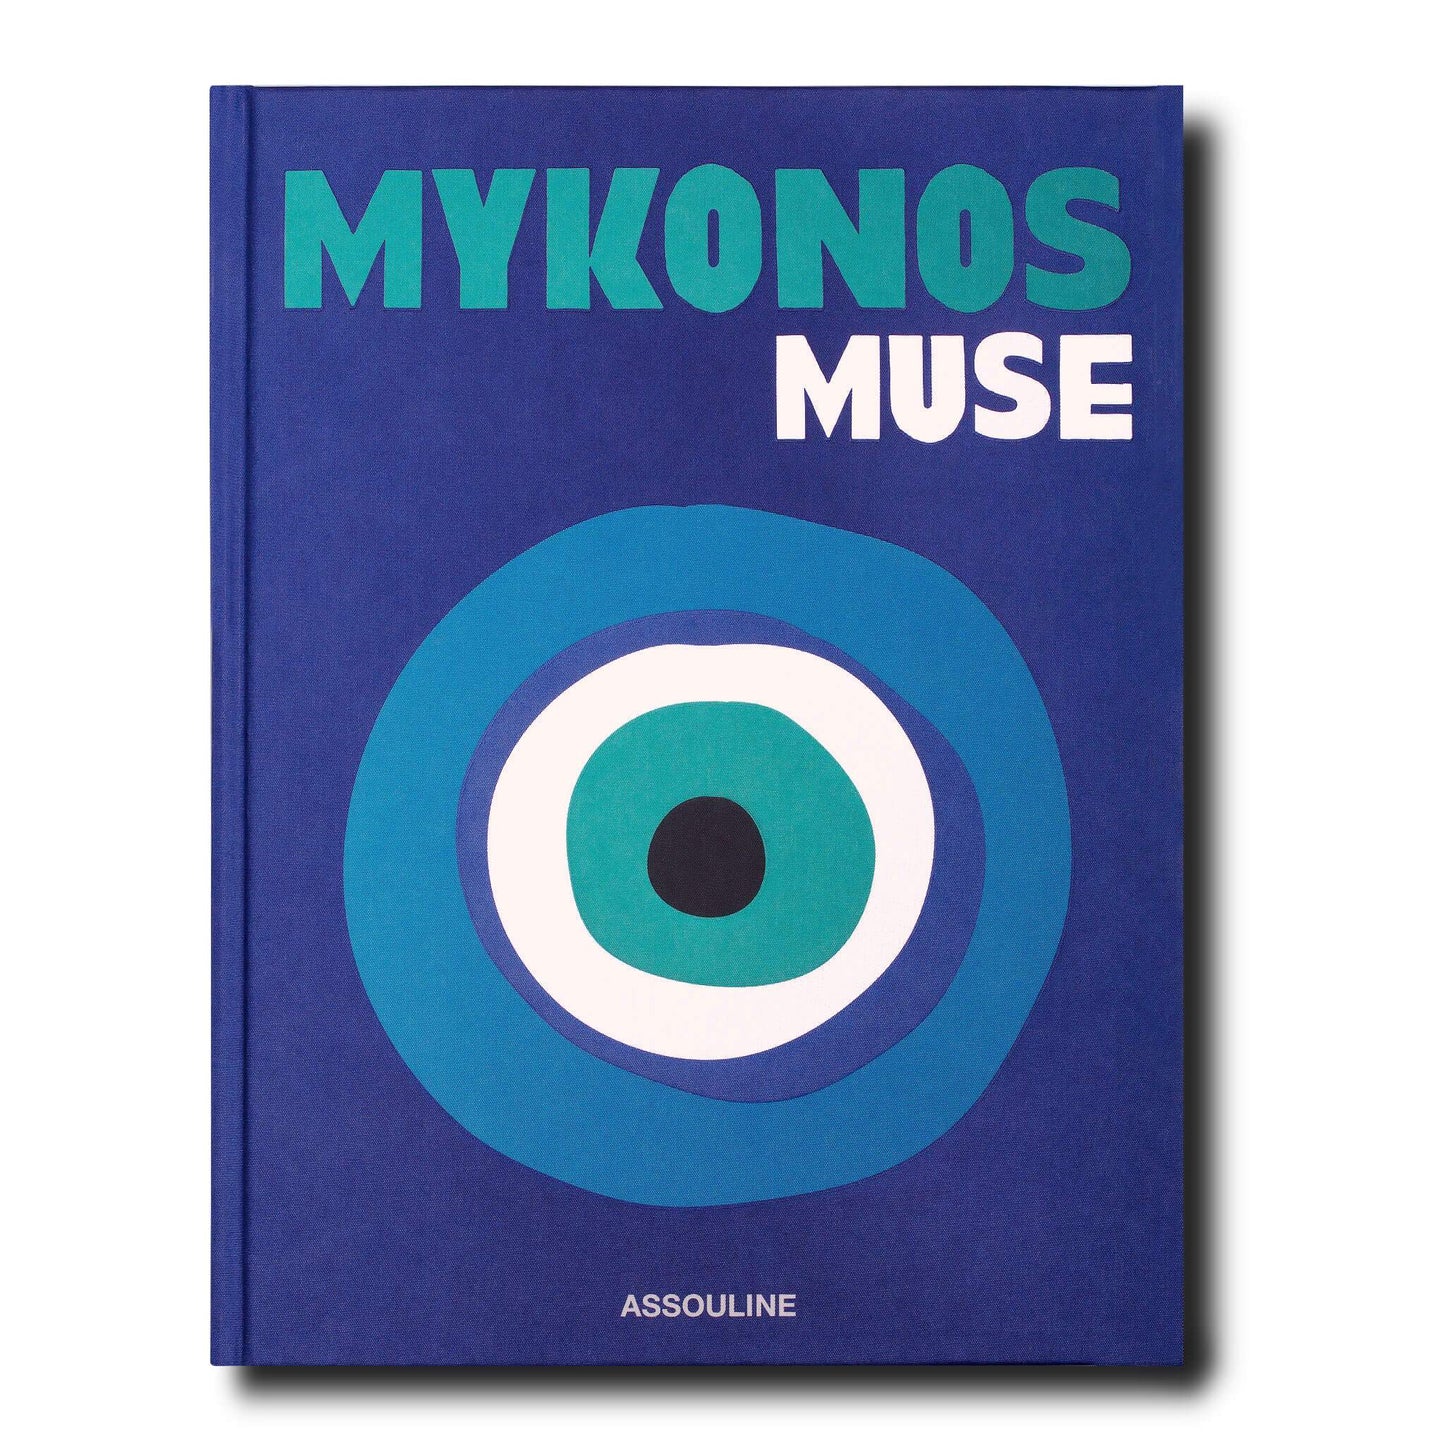 Travel Book Books in Mykonos Muse at Wrapsody